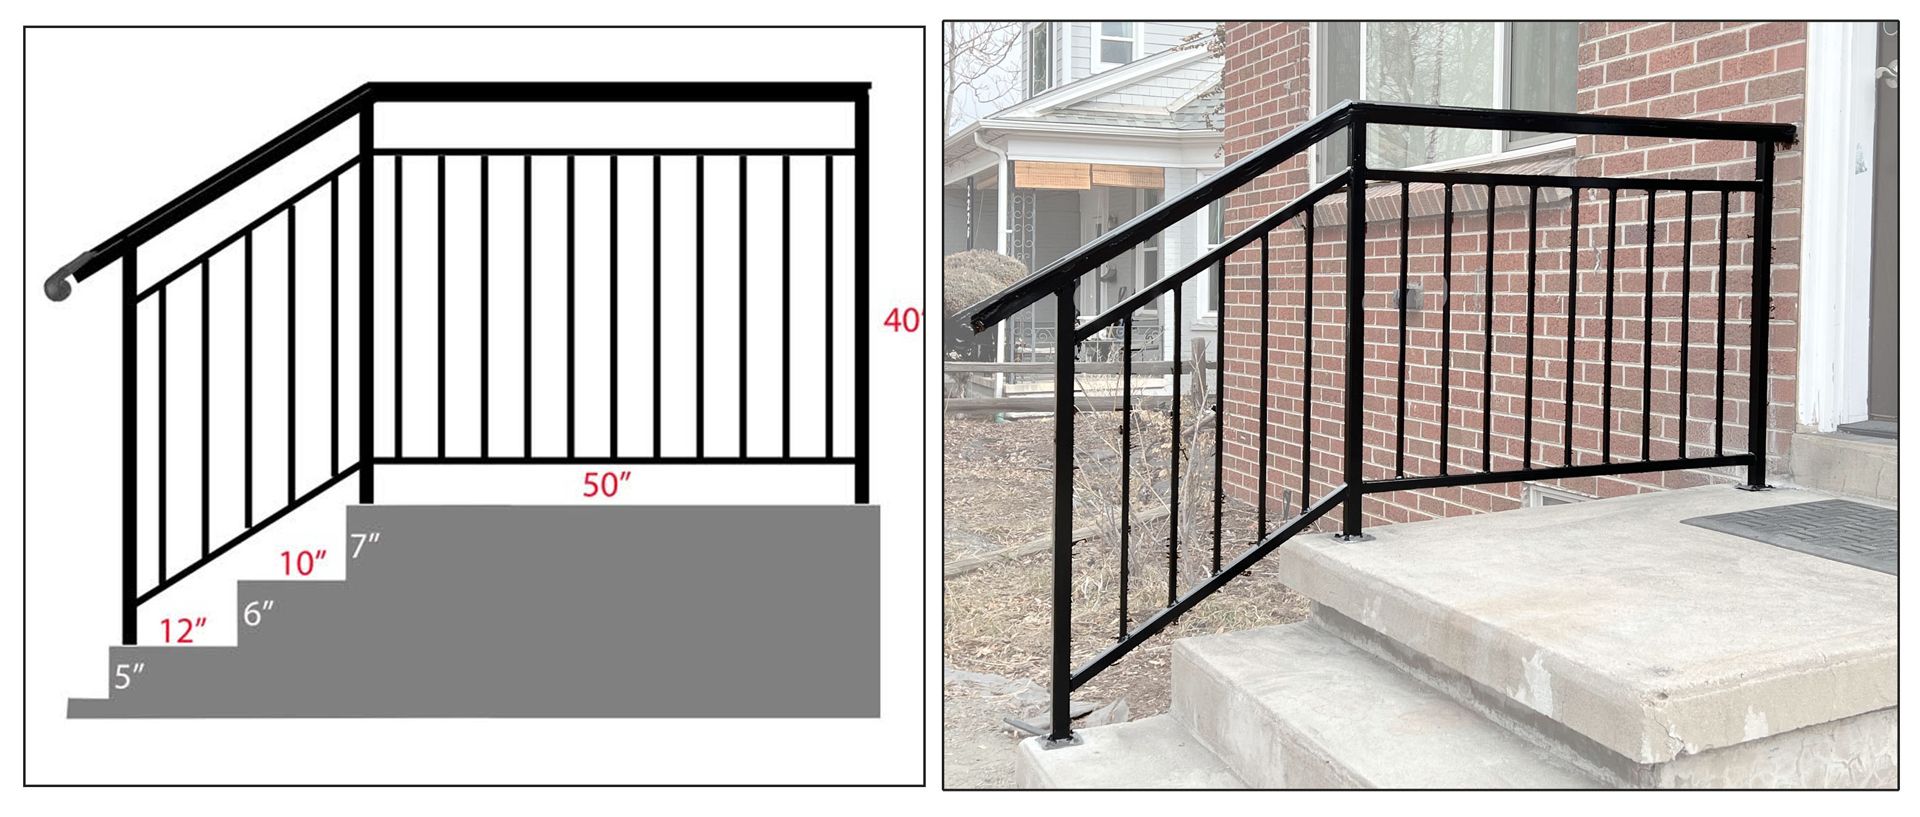 Railing Sketch With Actual Iron Railing